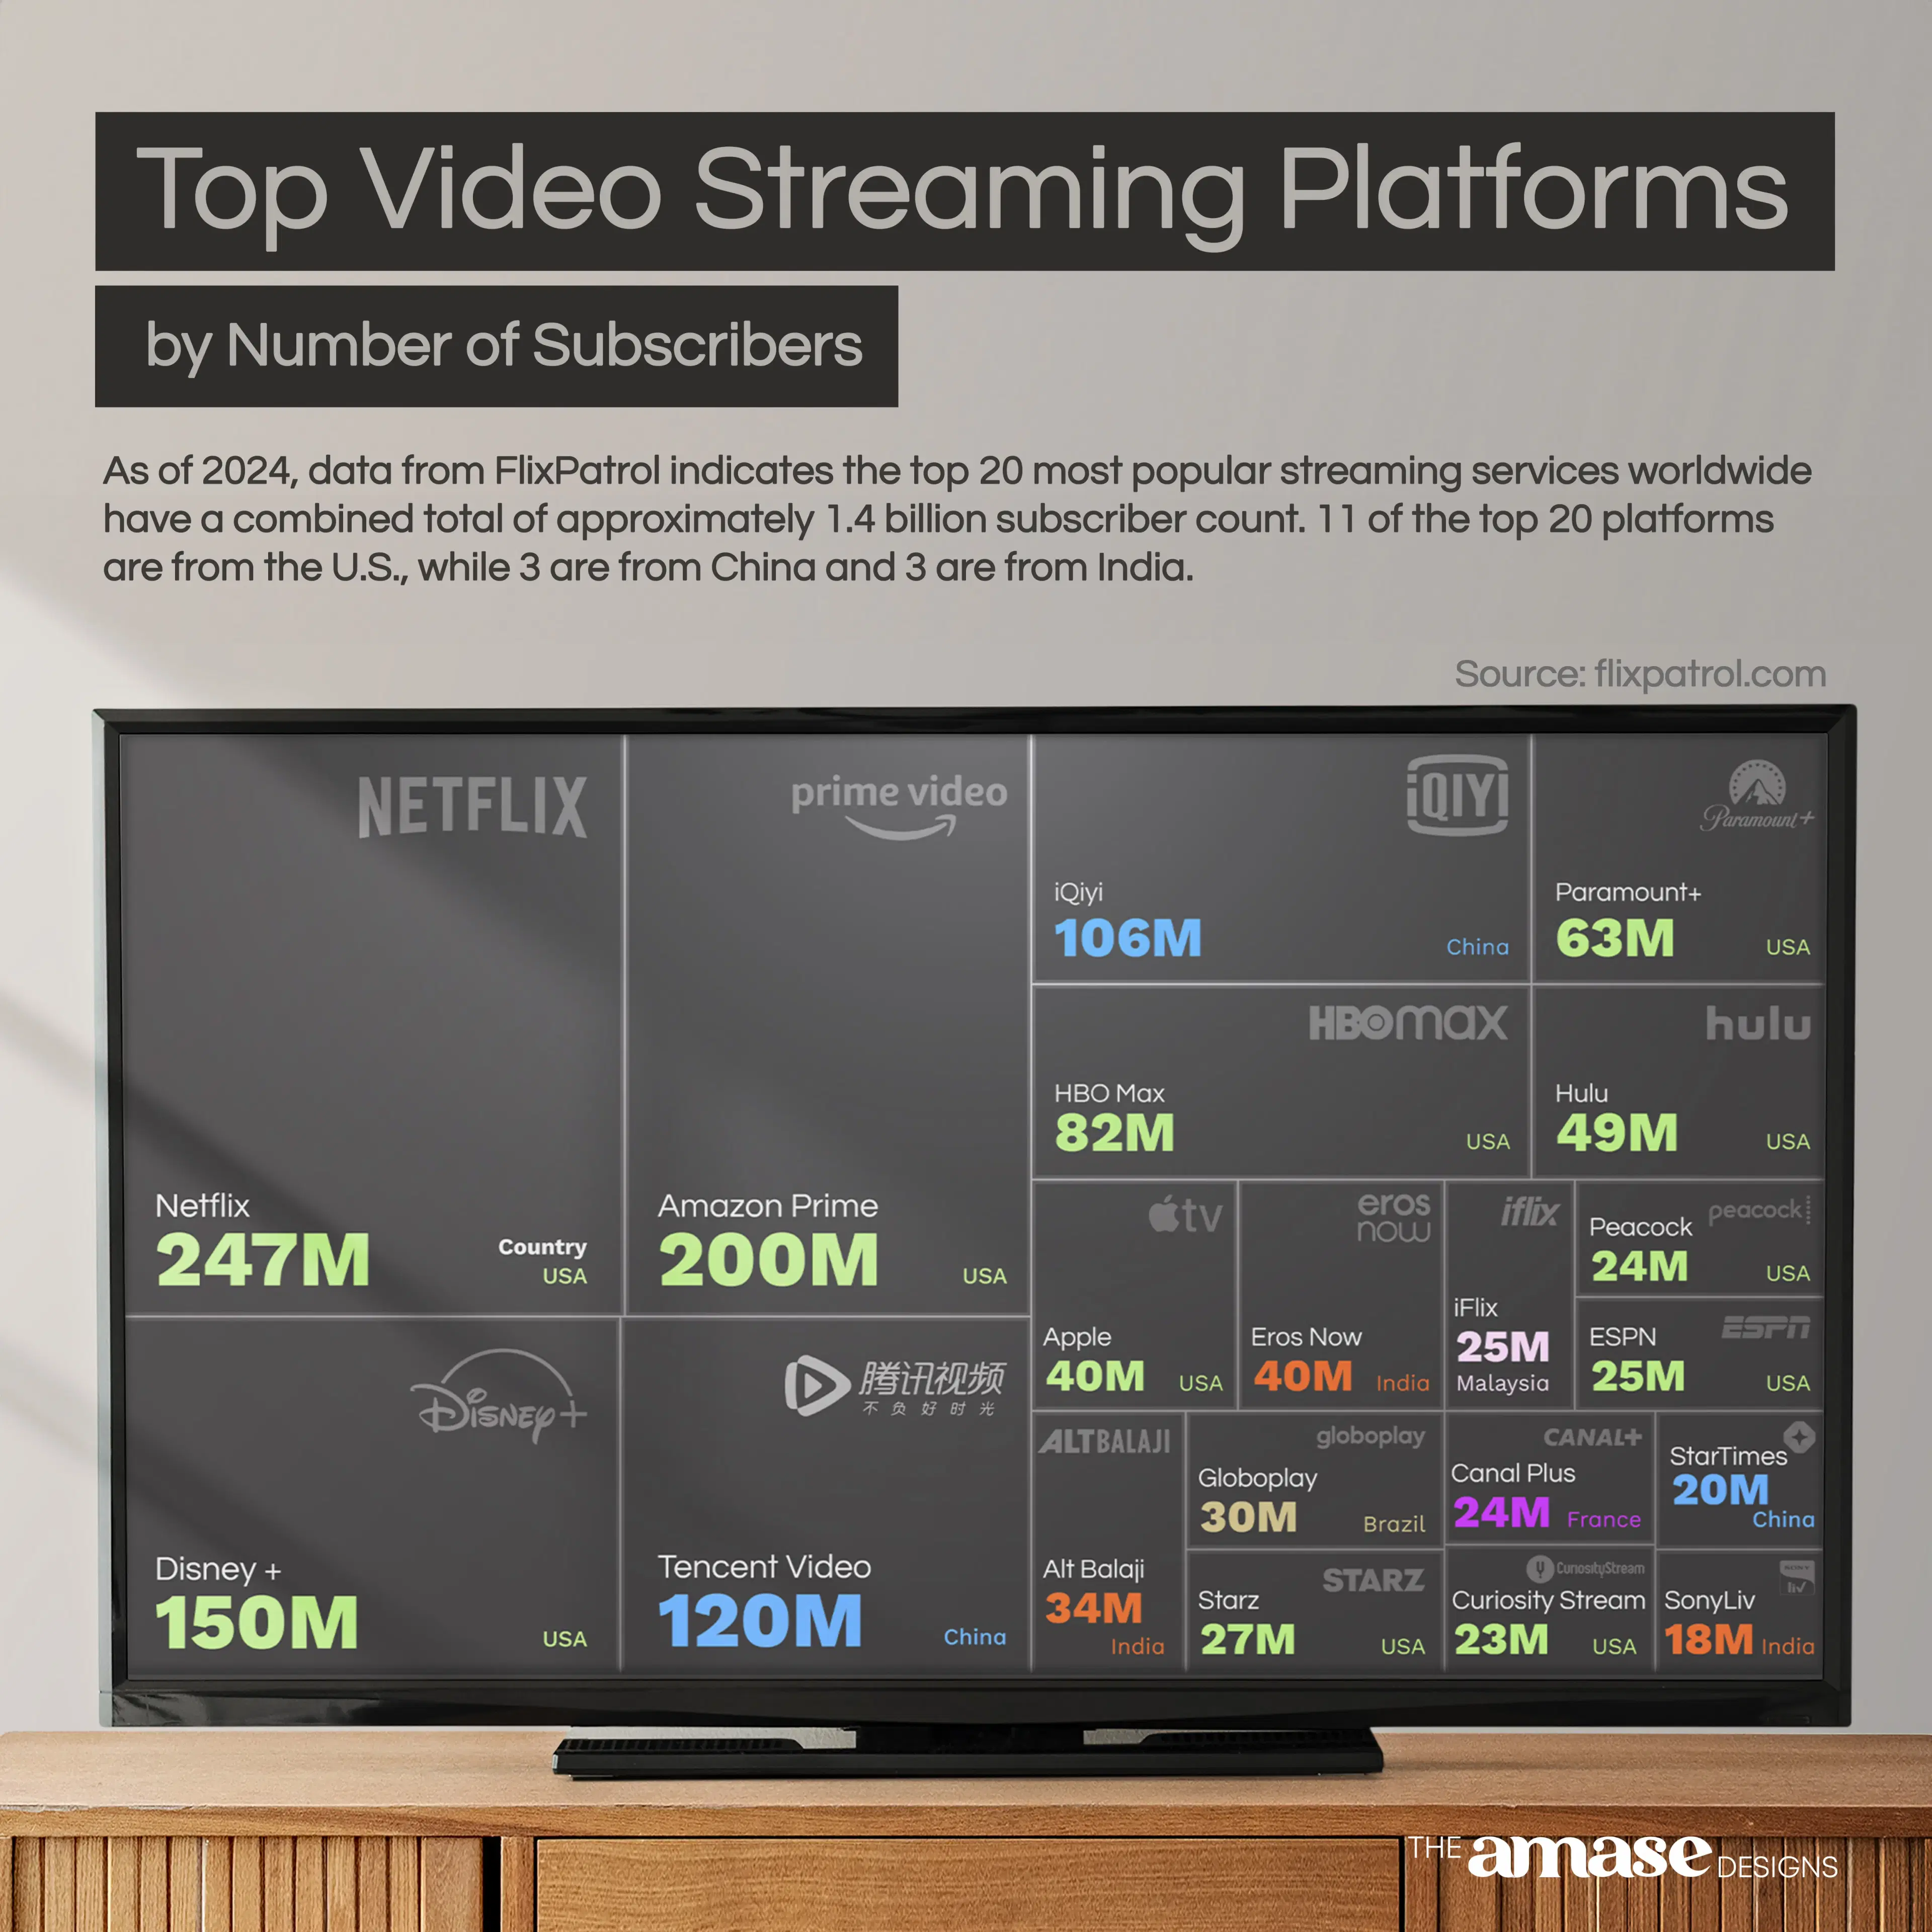 Top Video Streaming Platforms By Number of Subscribers